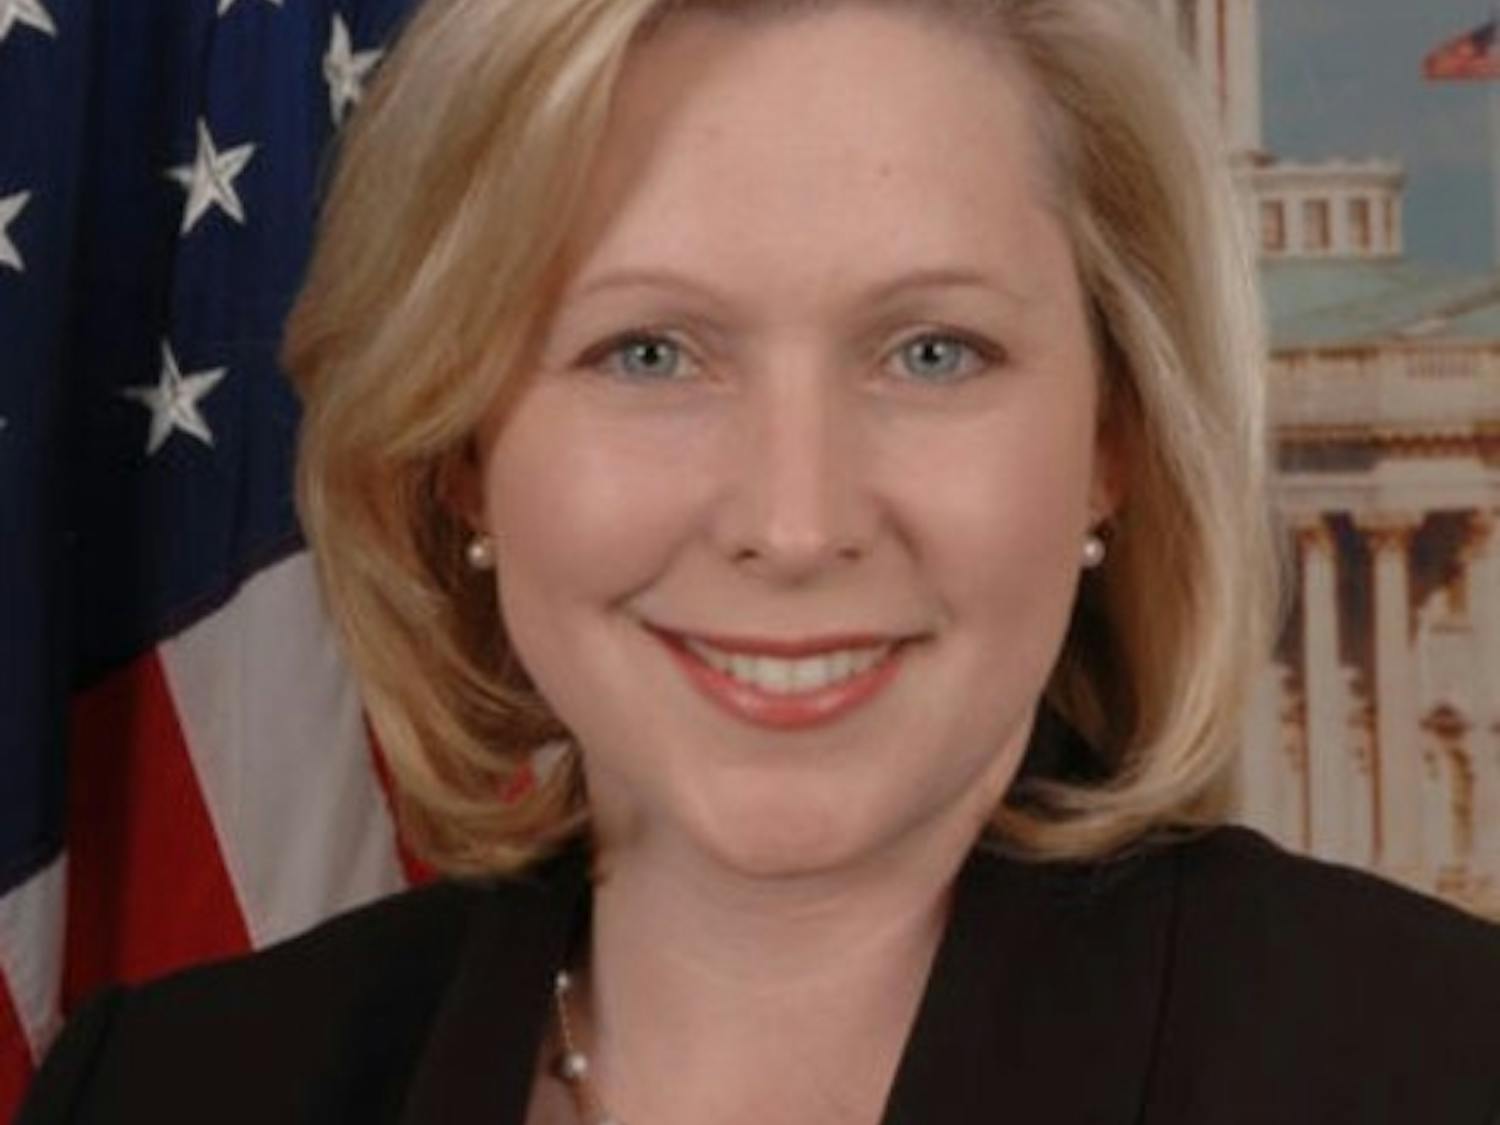 Sen. Kirsten Gillibrand '88, D-N.Y., will face an easier path to reelection following the withdrawal of Rep. Carolyn Maloney, D-N.Y., from the race.